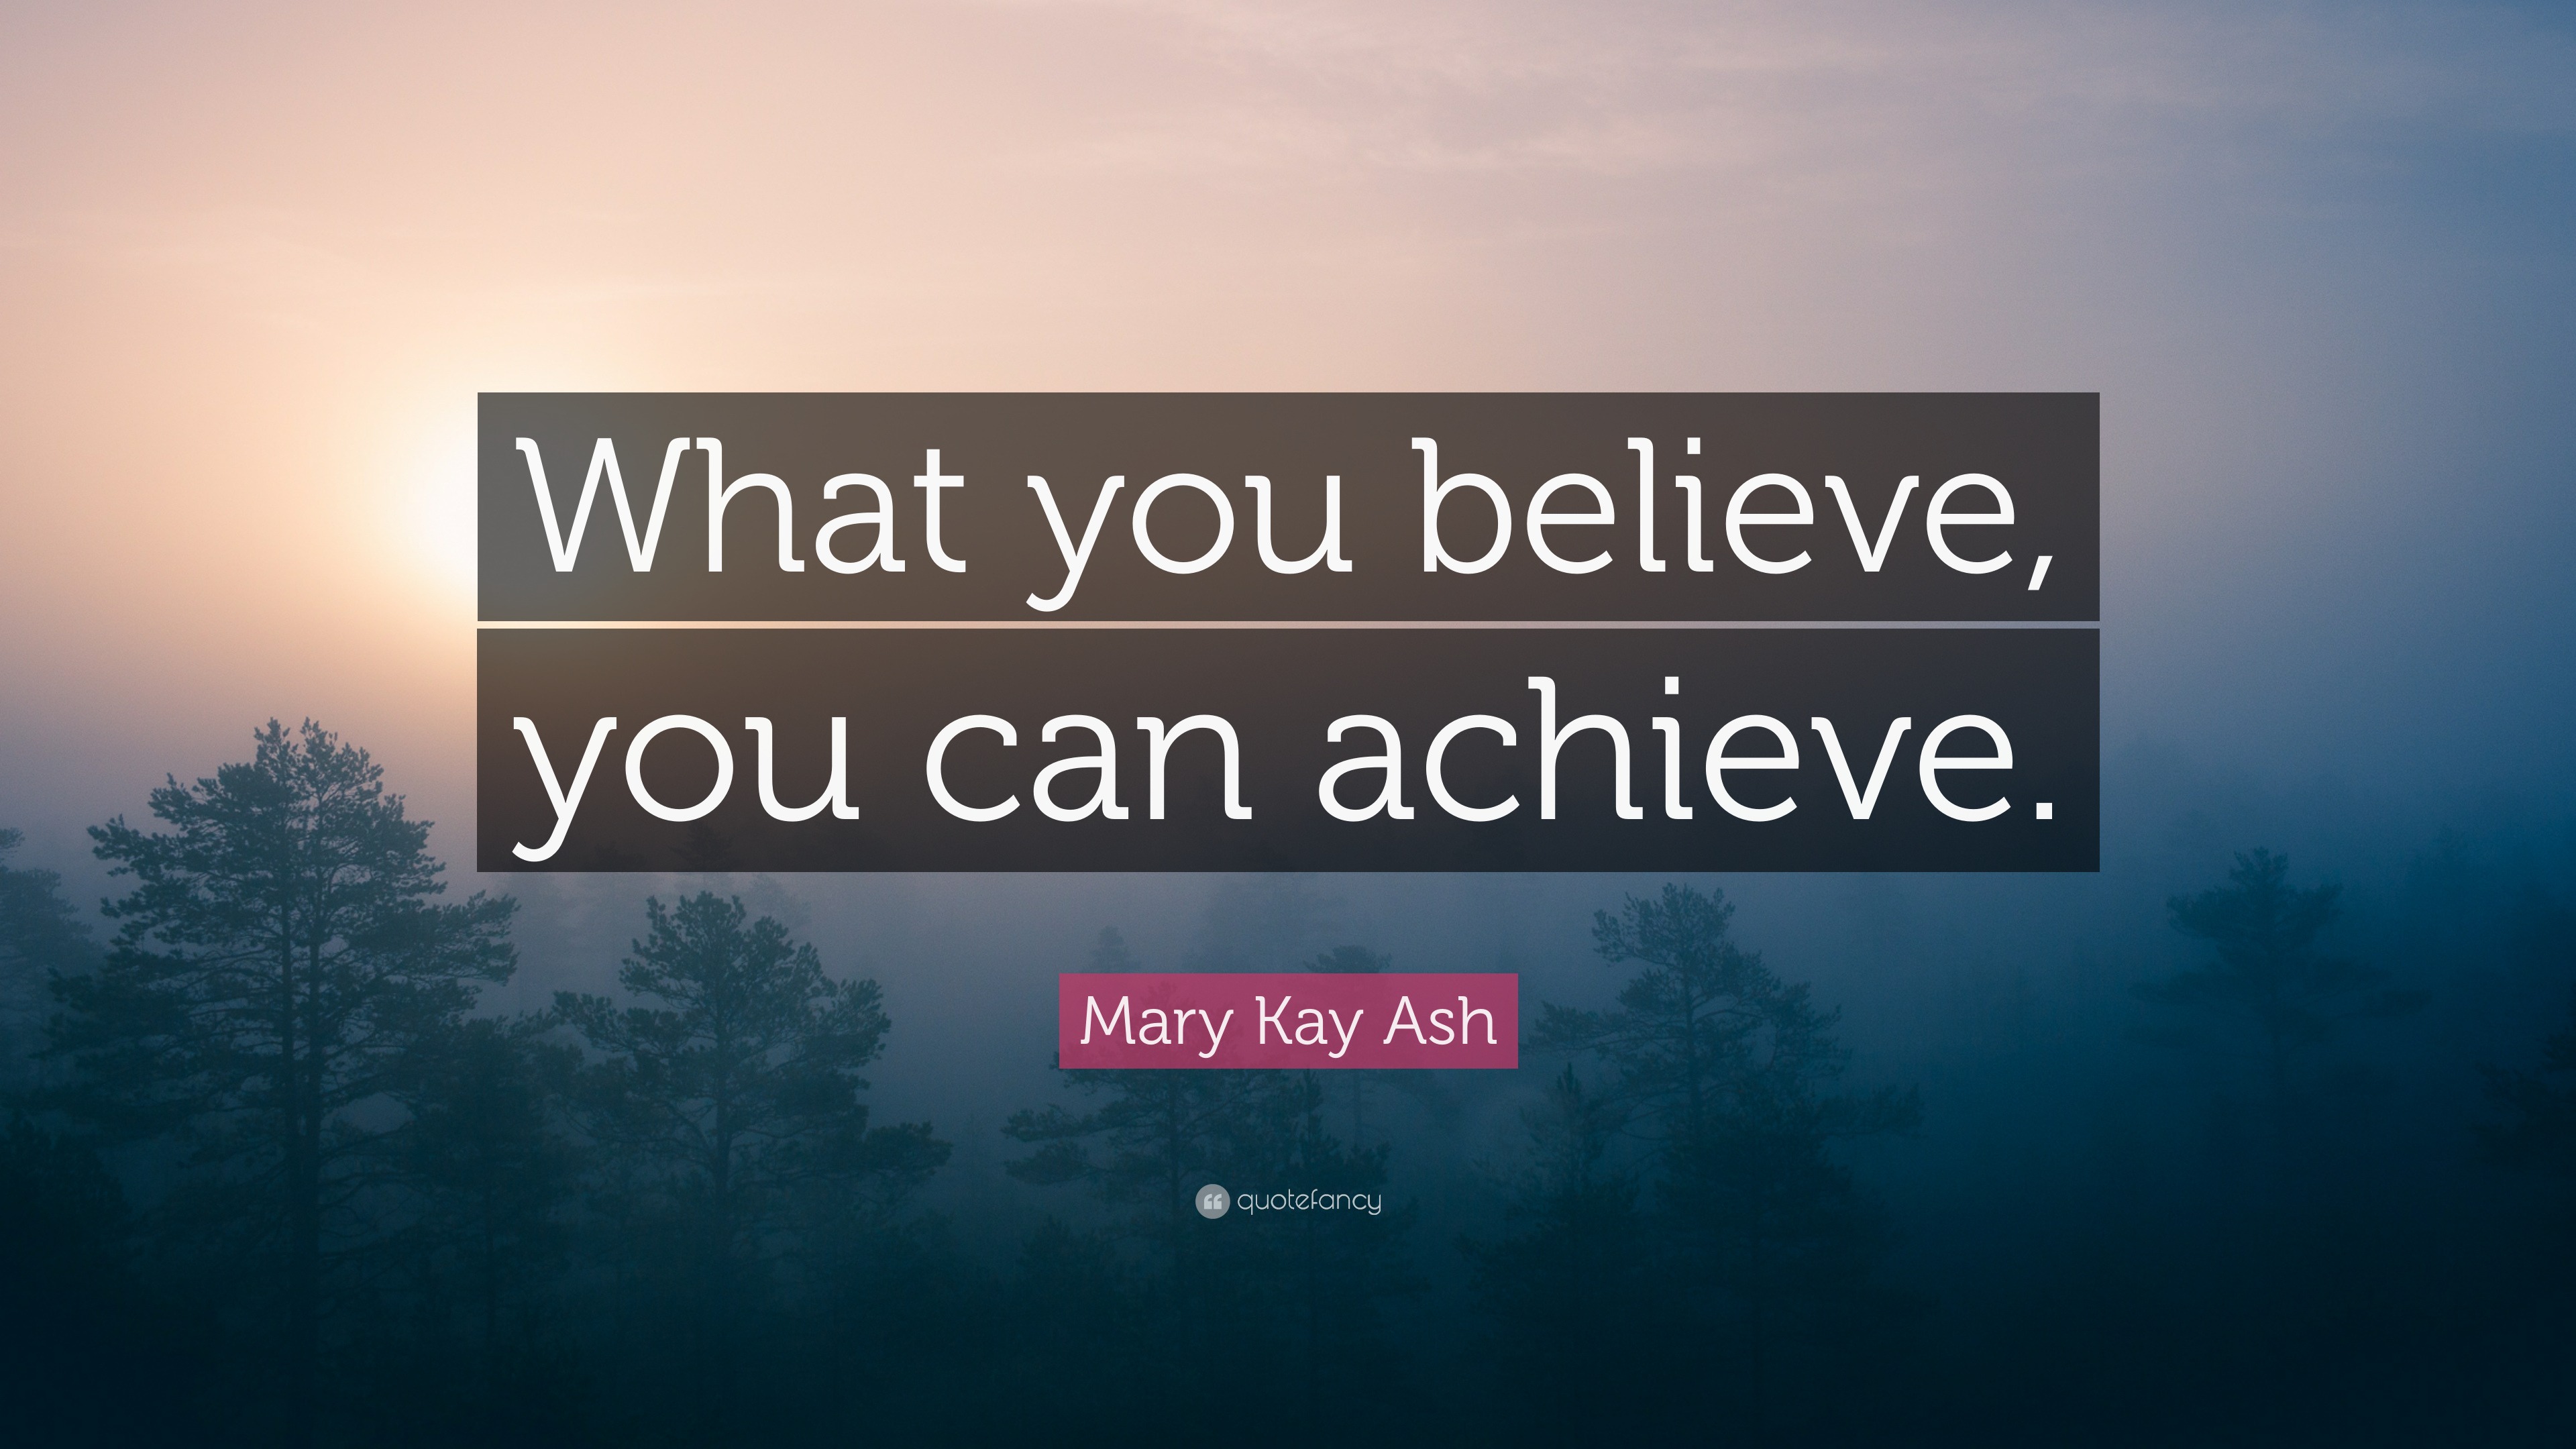 Mary Kay Ash Quote: "What you believe, you can achieve." (11 wallpapers) - Quotefancy